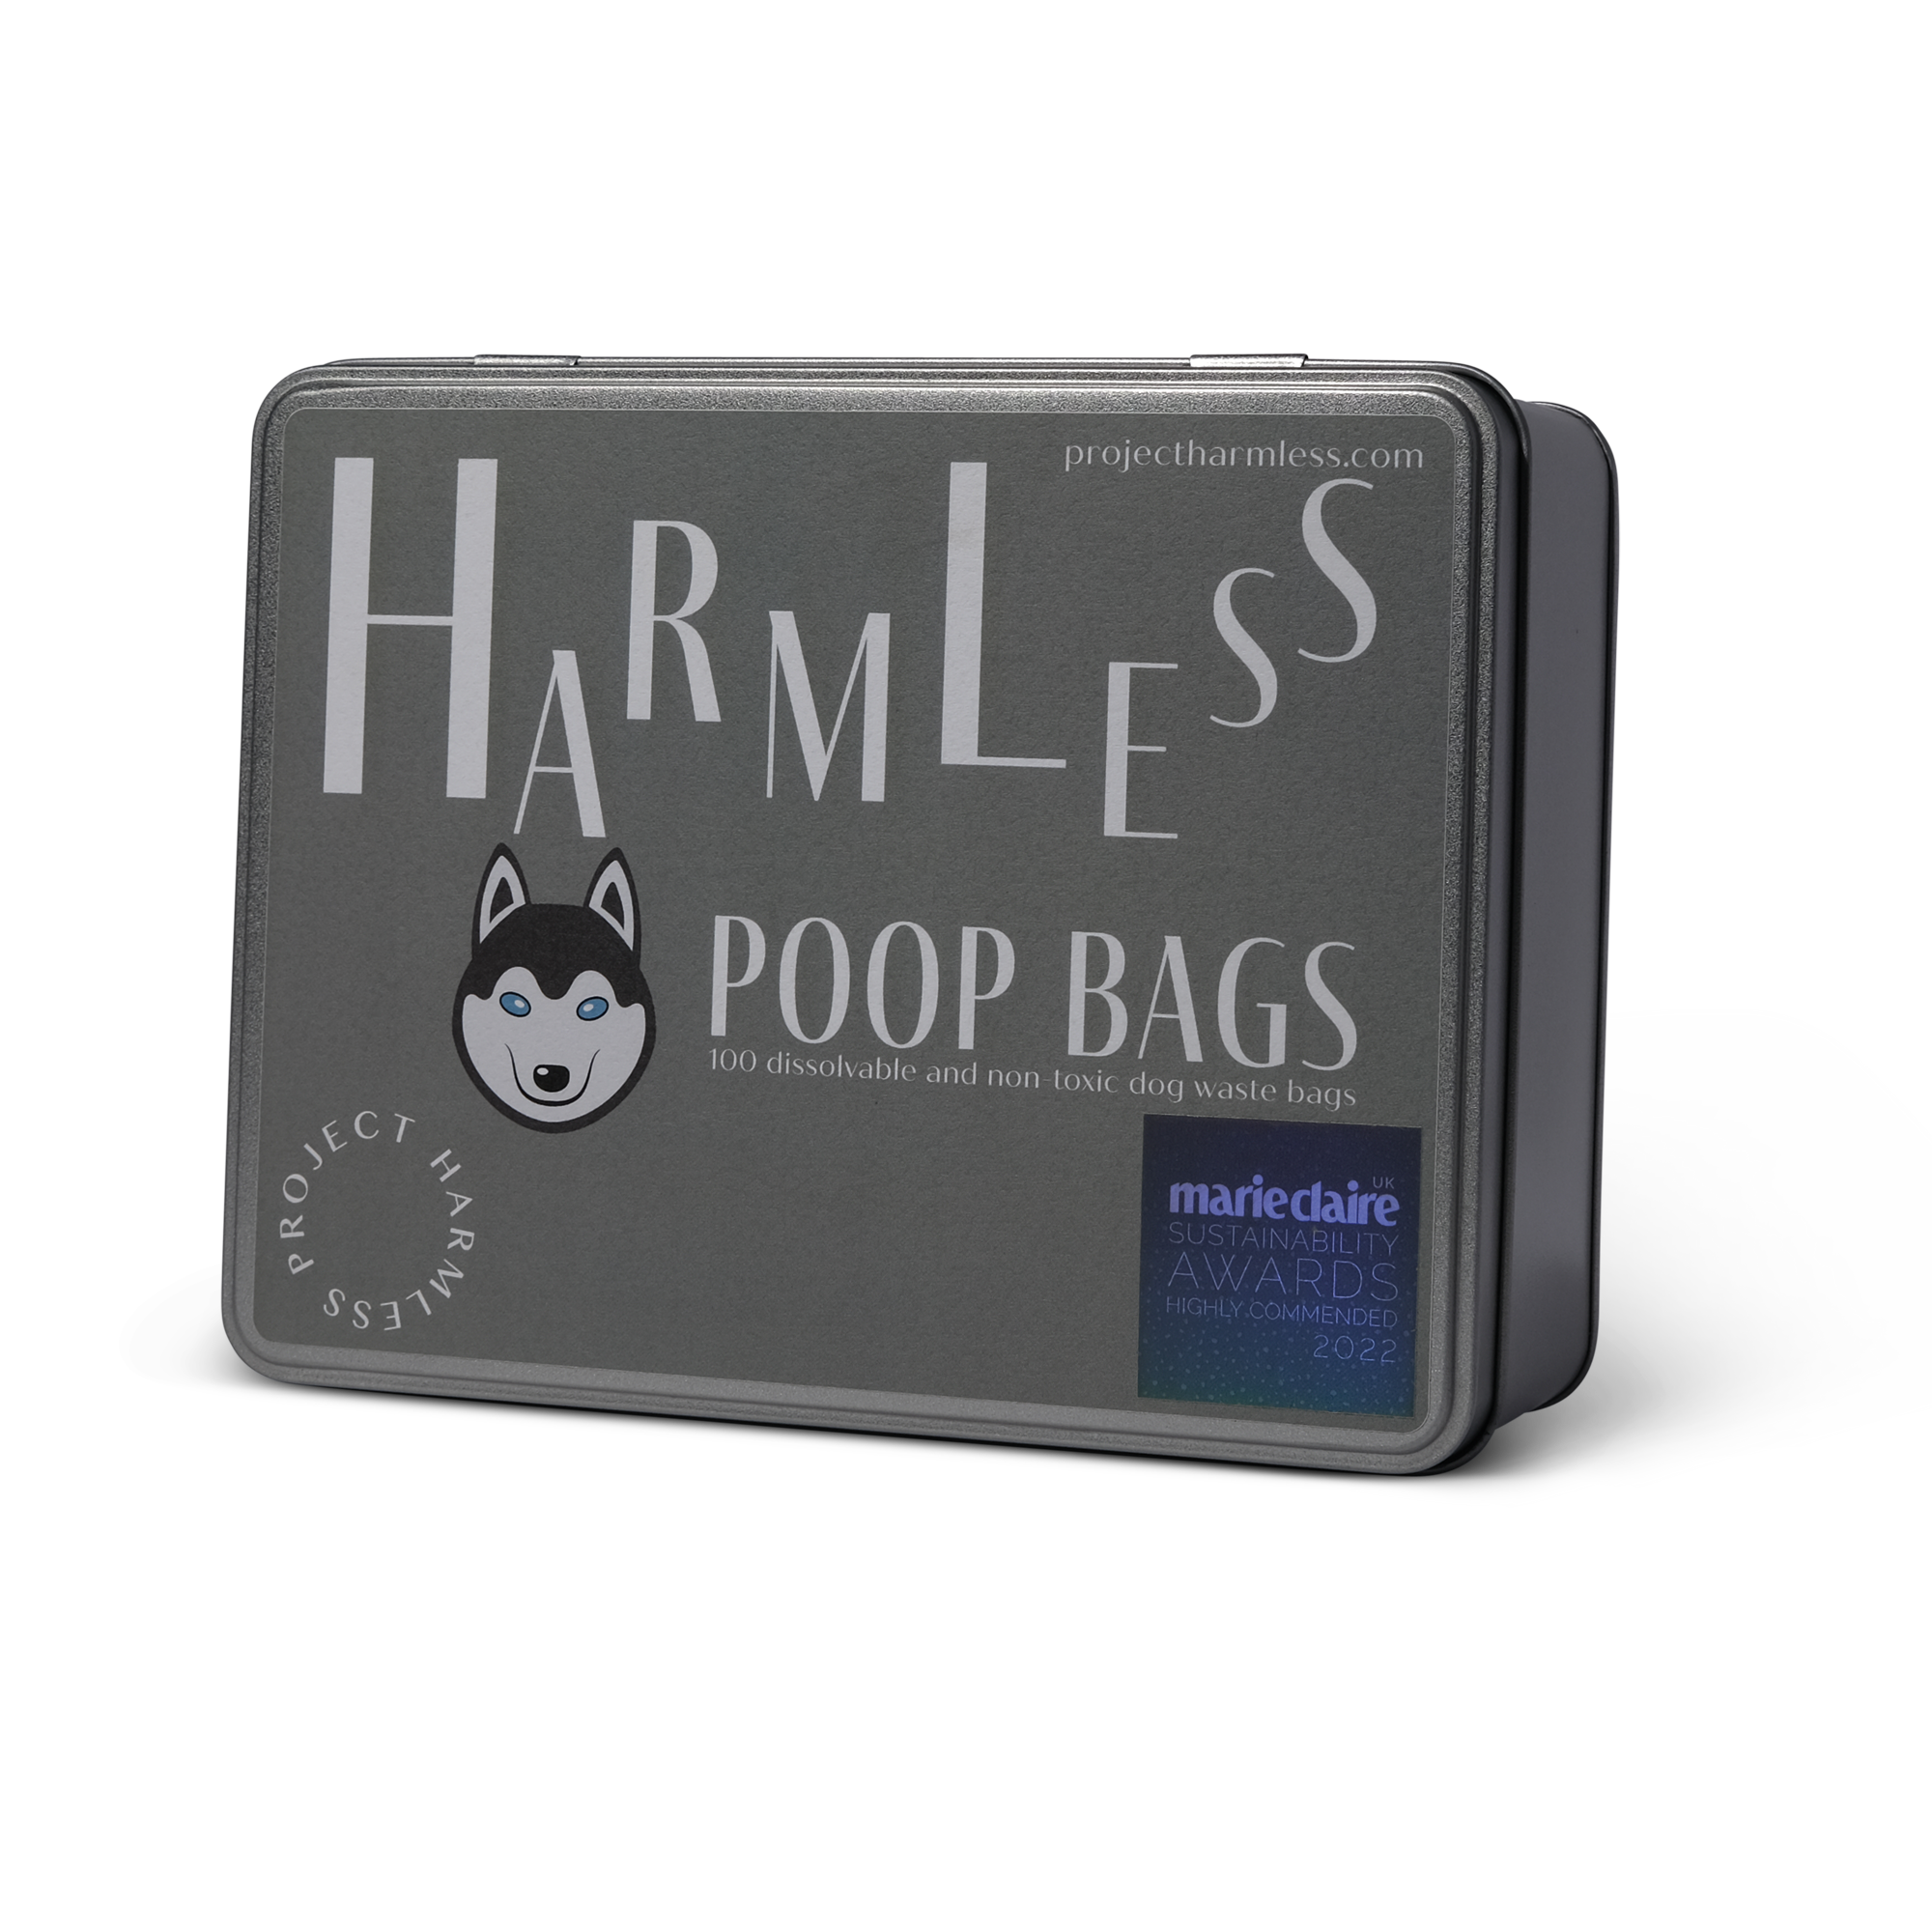 Harmless Poop Bags Subscription